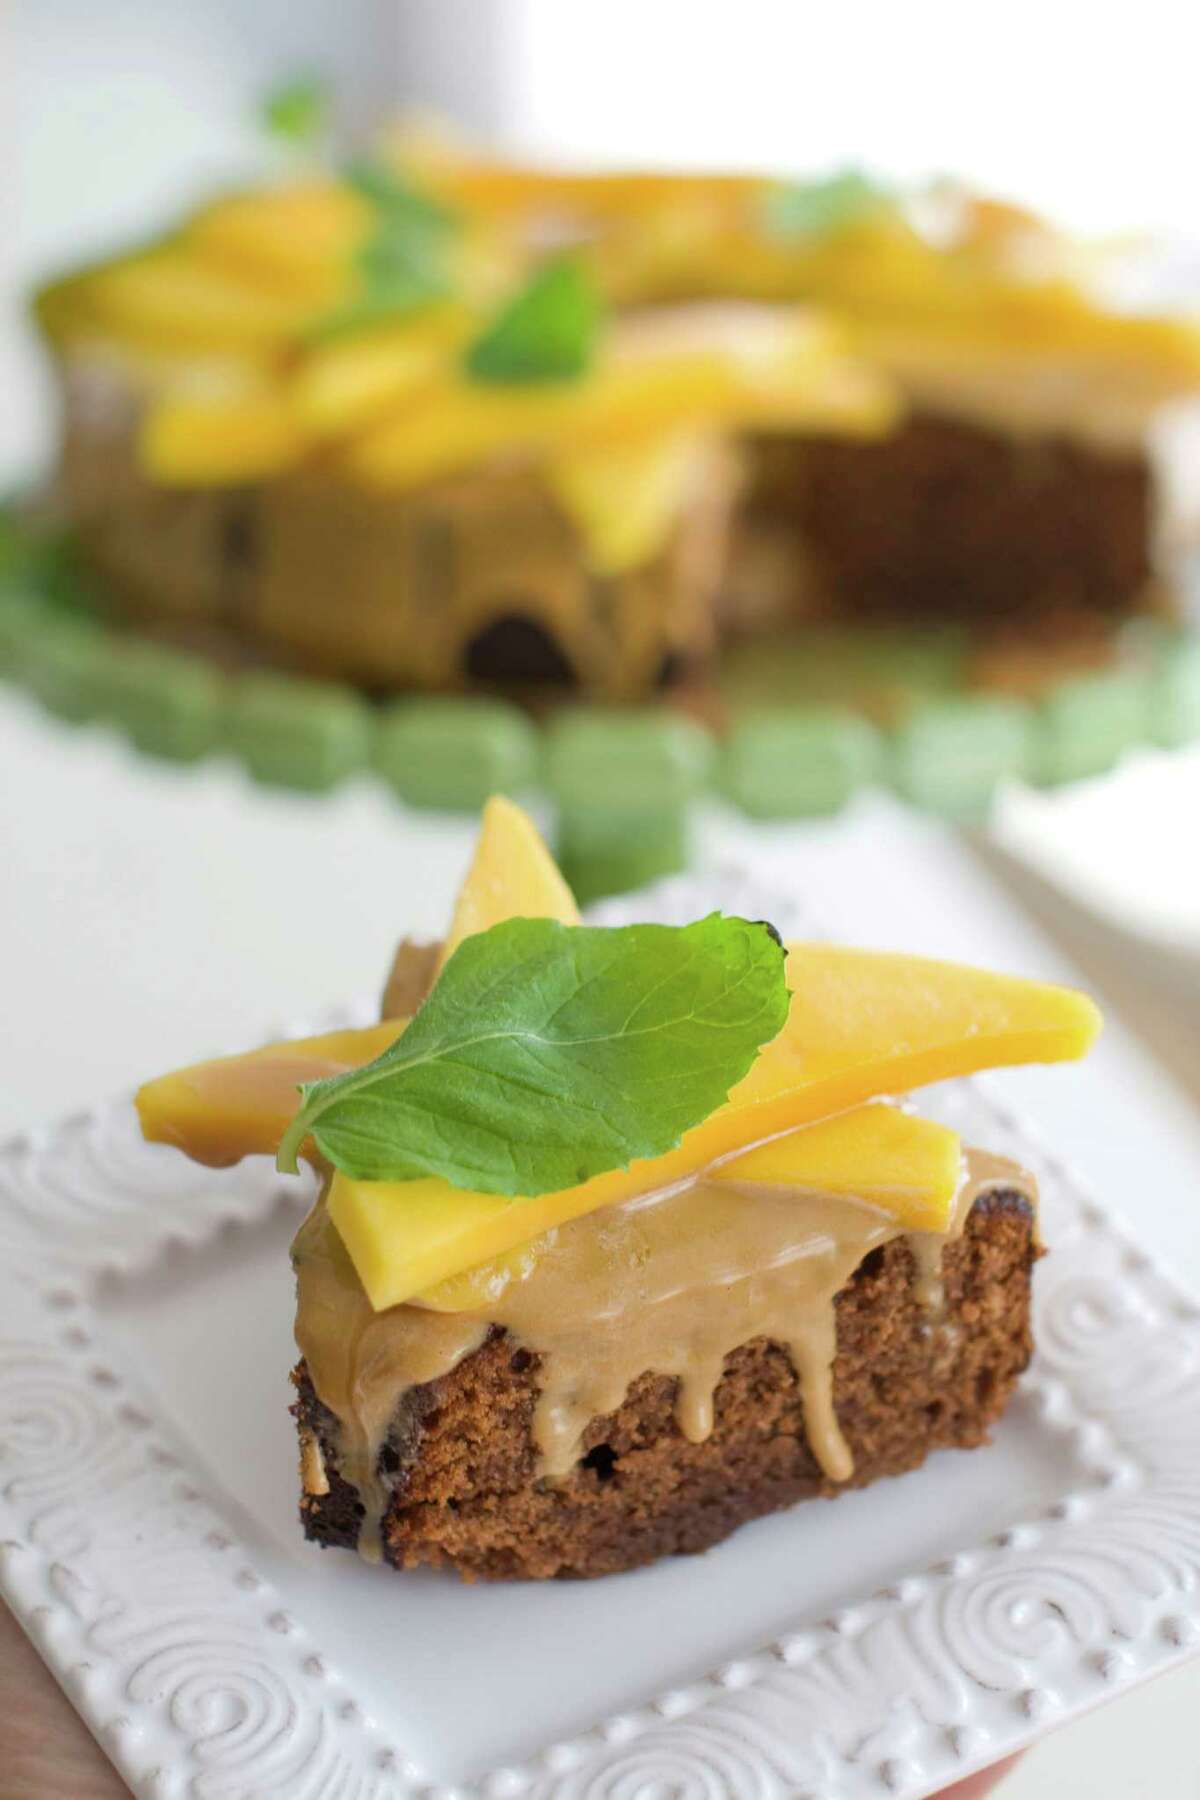 In this image taken on March 26, 2012 a mango-topped chocolate honey cake is seen in Concord, N.H. (AP Photo/Matthew Mead)